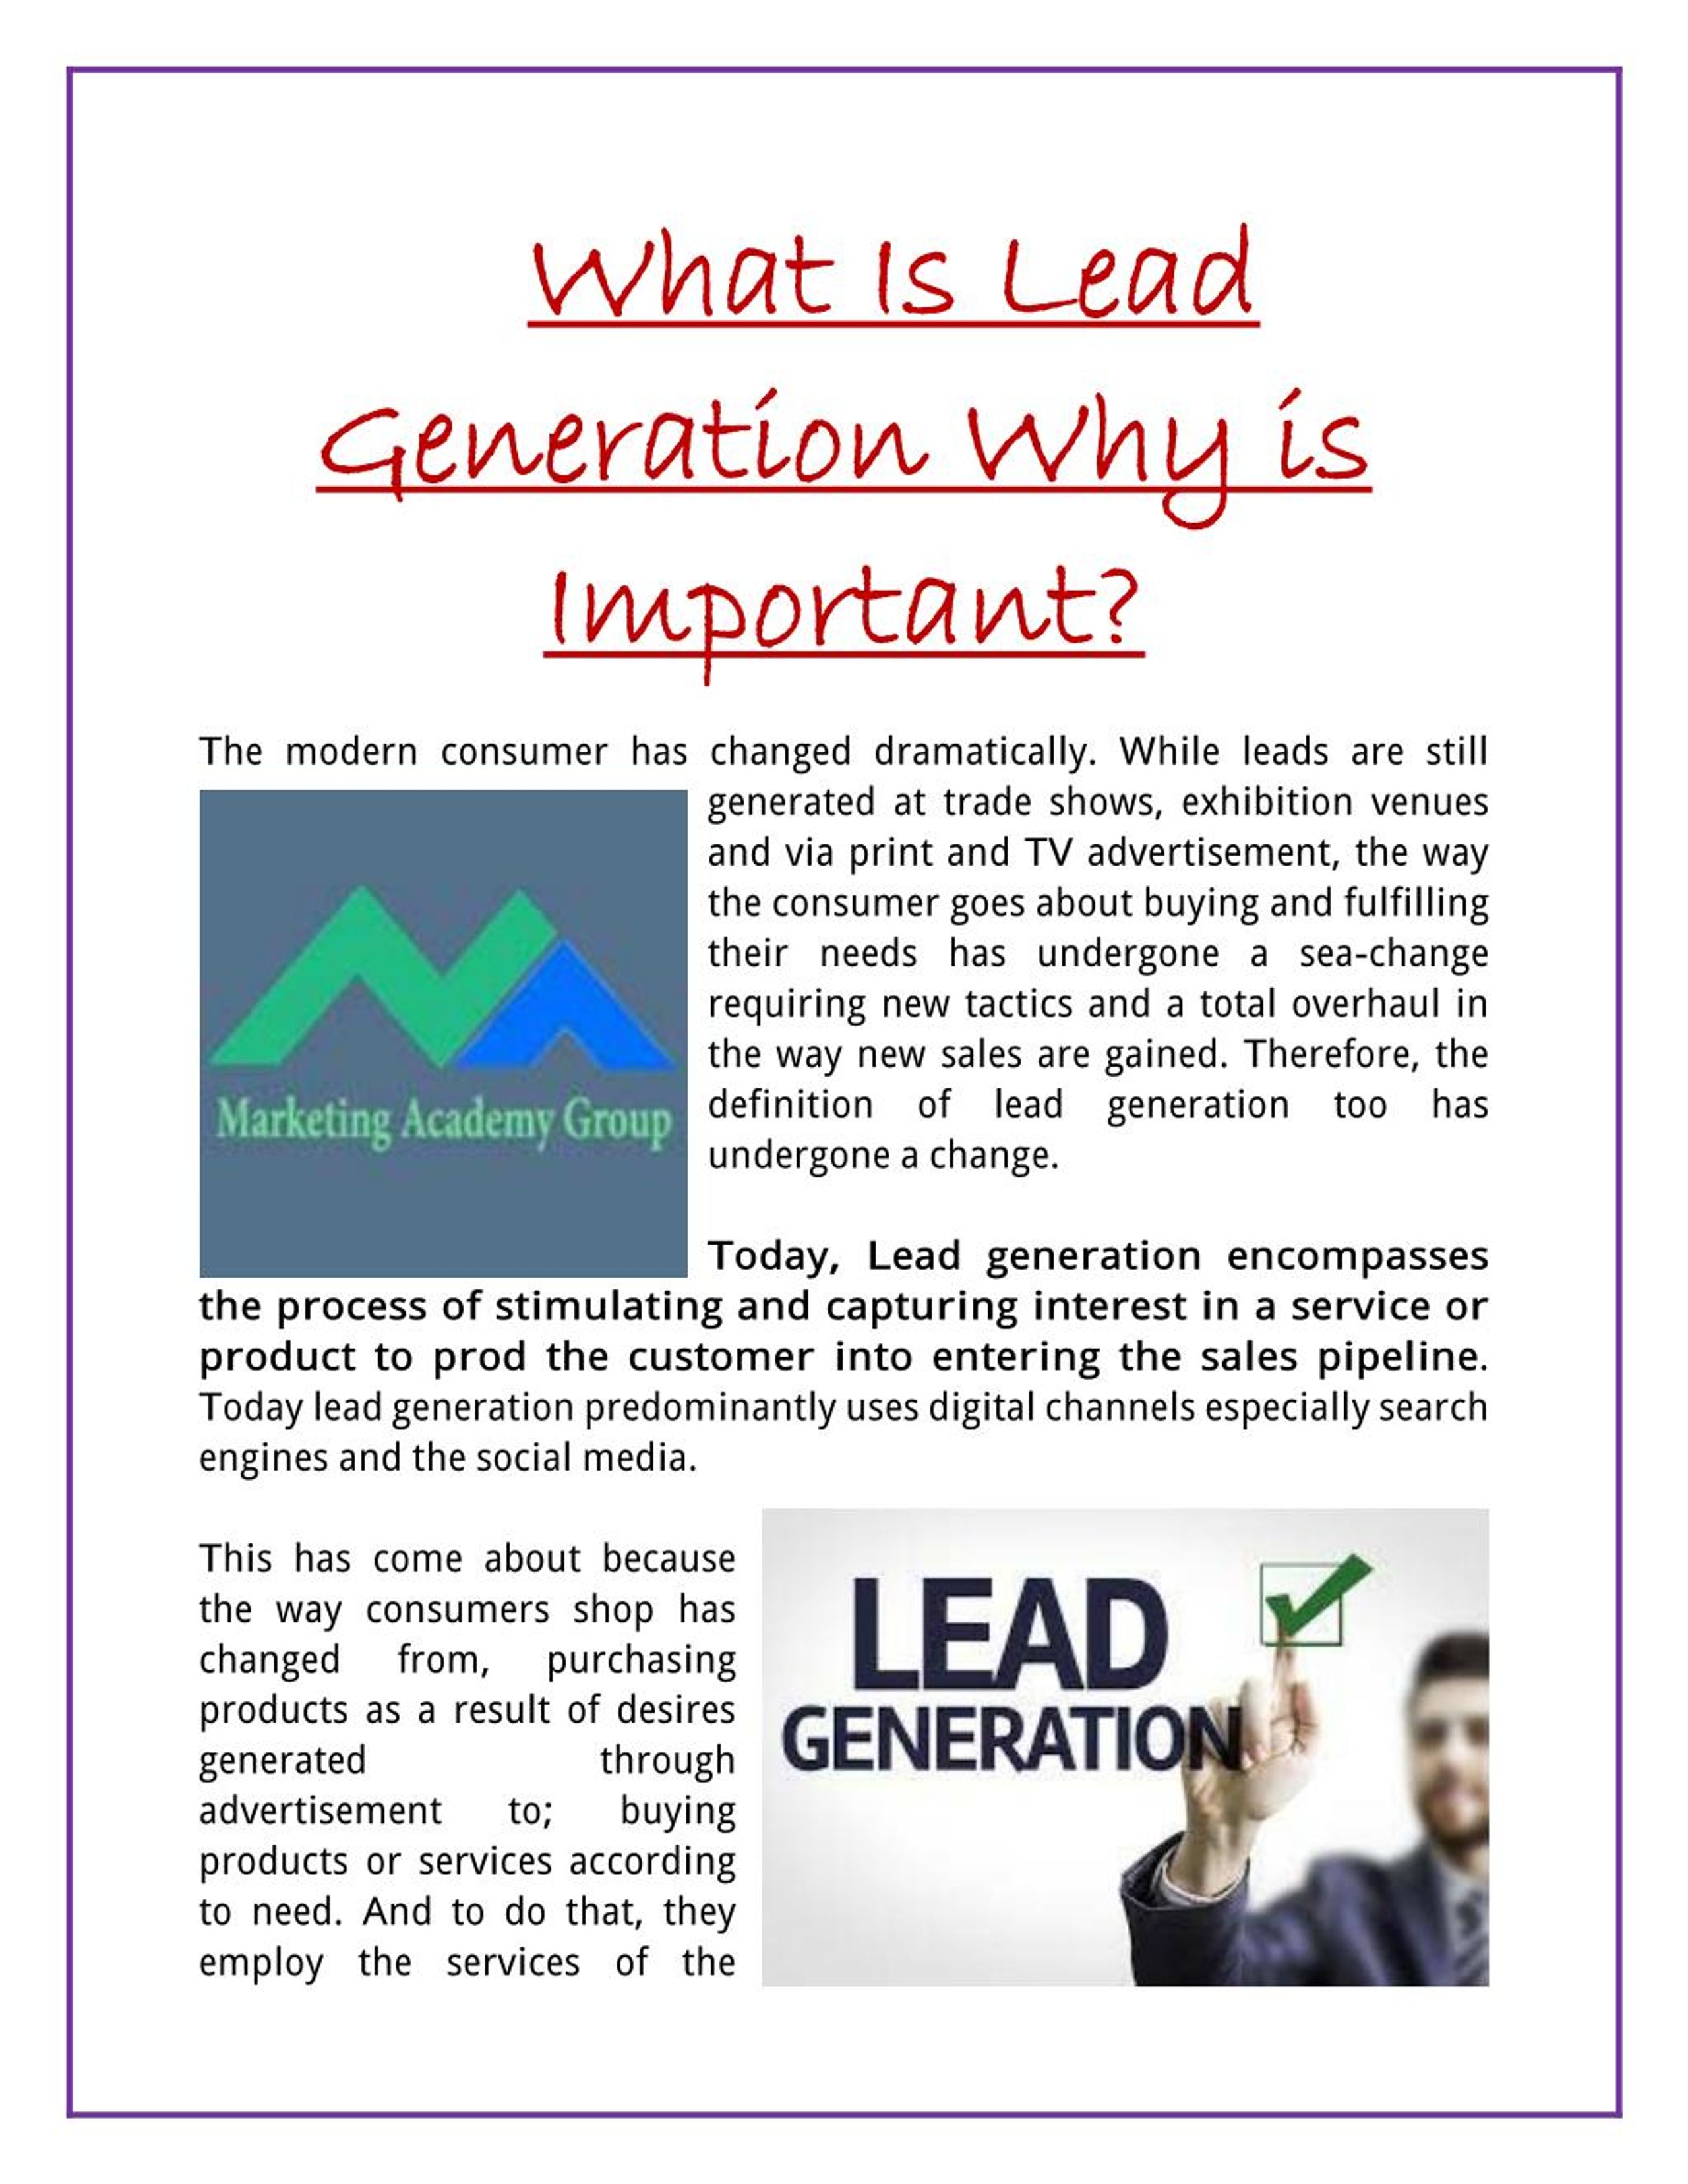 PPT What Is Lead Generation Why Important? PowerPoint Presentation - ID:7415720